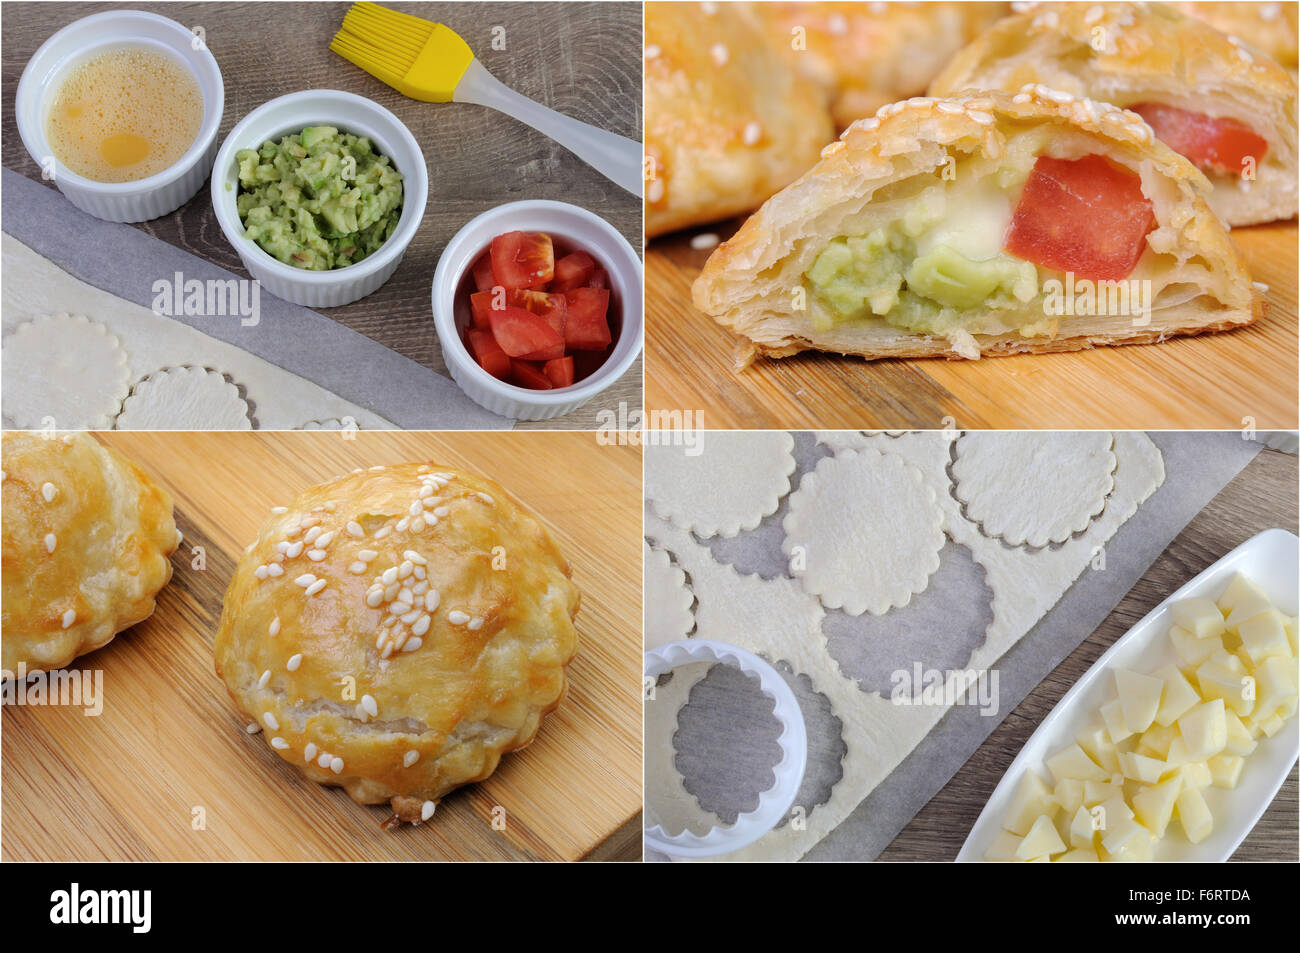 Fragments of cooking stuffed avocado rolls with cheese and tomato Stock Photo